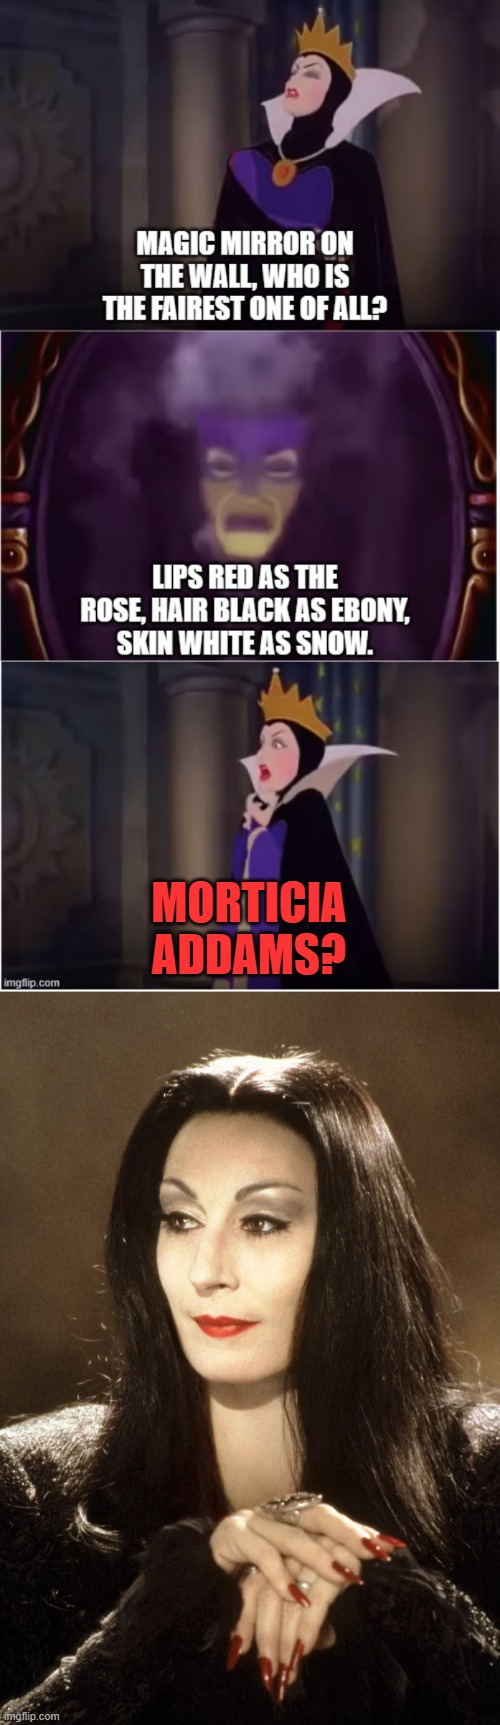 The Evil Queen's Unexpected And Unintended Rival | MORTICIA ADDAMS? | image tagged in evil queen,snow white,disney,anjelica huston,morticia addams,magic mirror | made w/ Imgflip meme maker